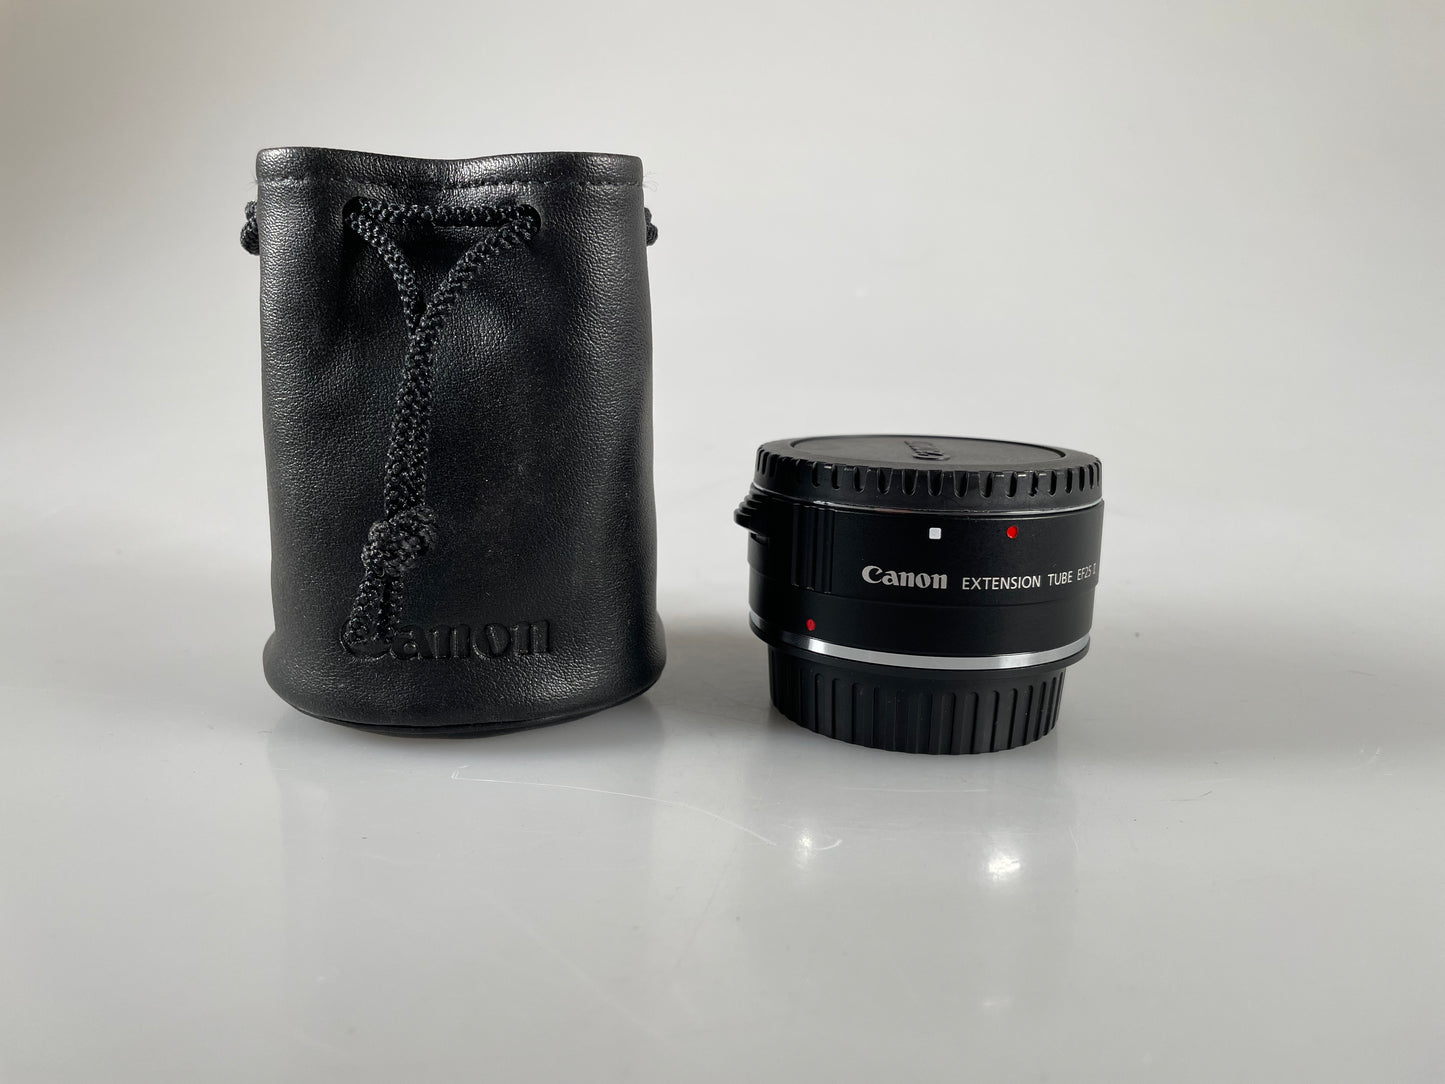 Canon Lens Extension Tube EF25 II